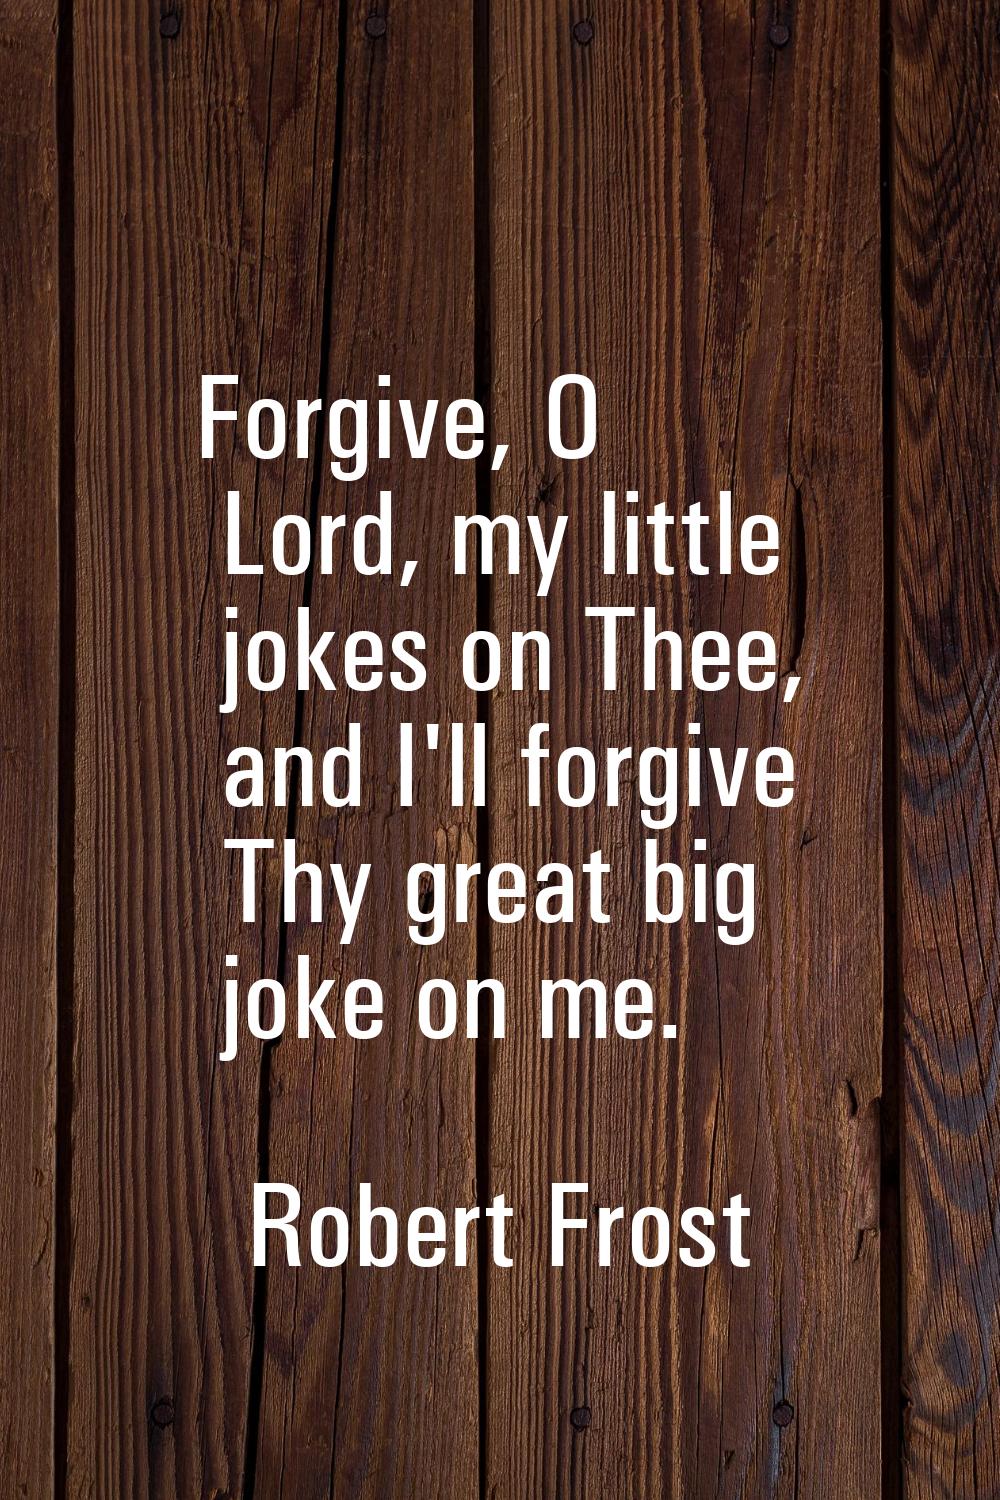 Forgive, O Lord, my little jokes on Thee, and I'll forgive Thy great big joke on me.